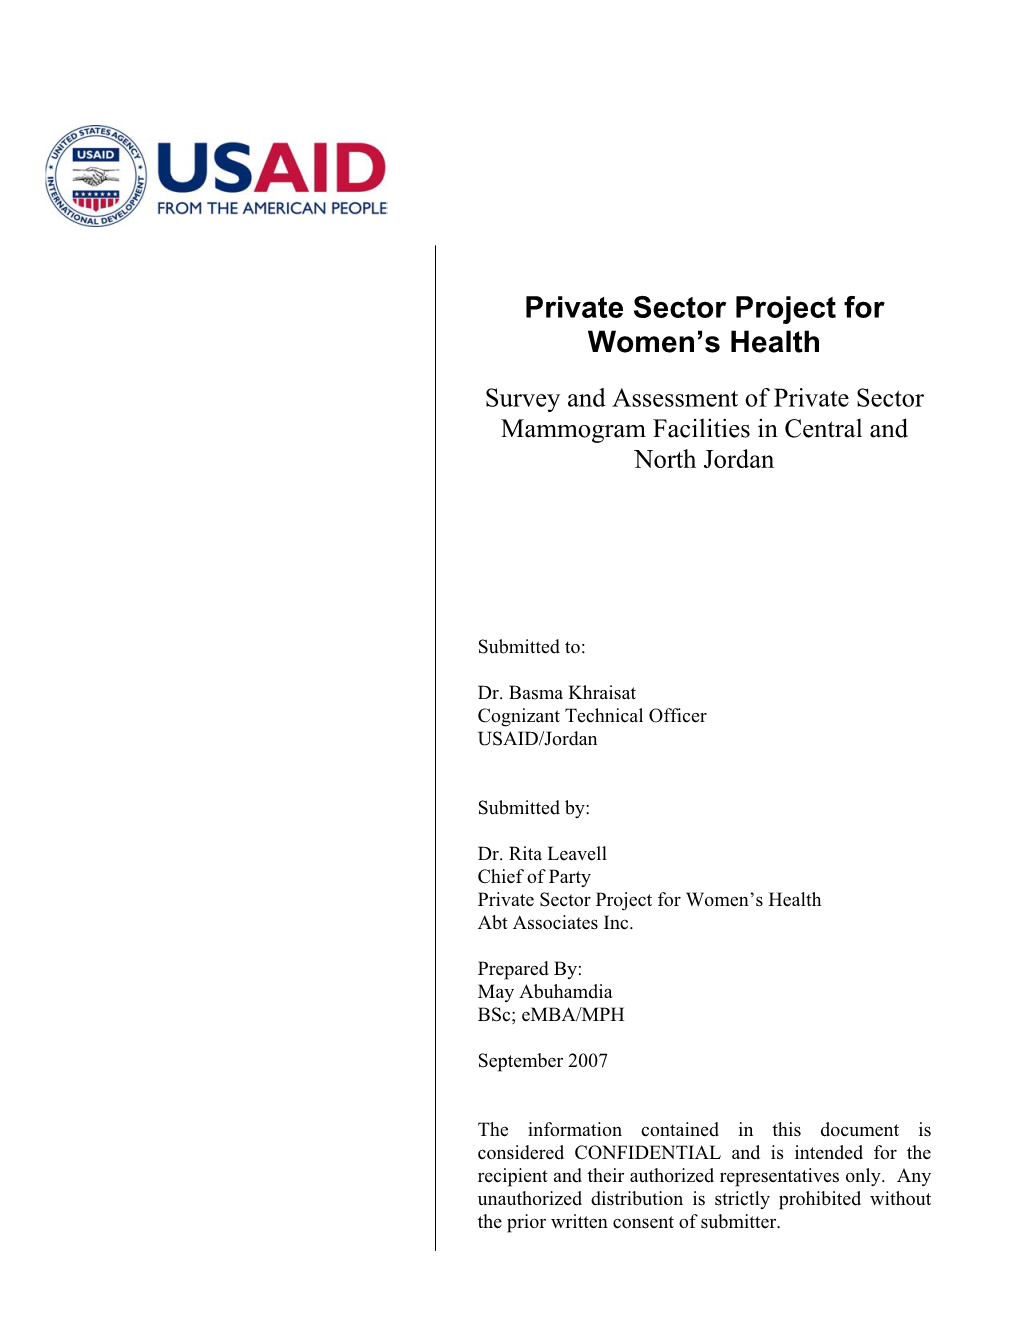 Private Sector Project for Women's Health